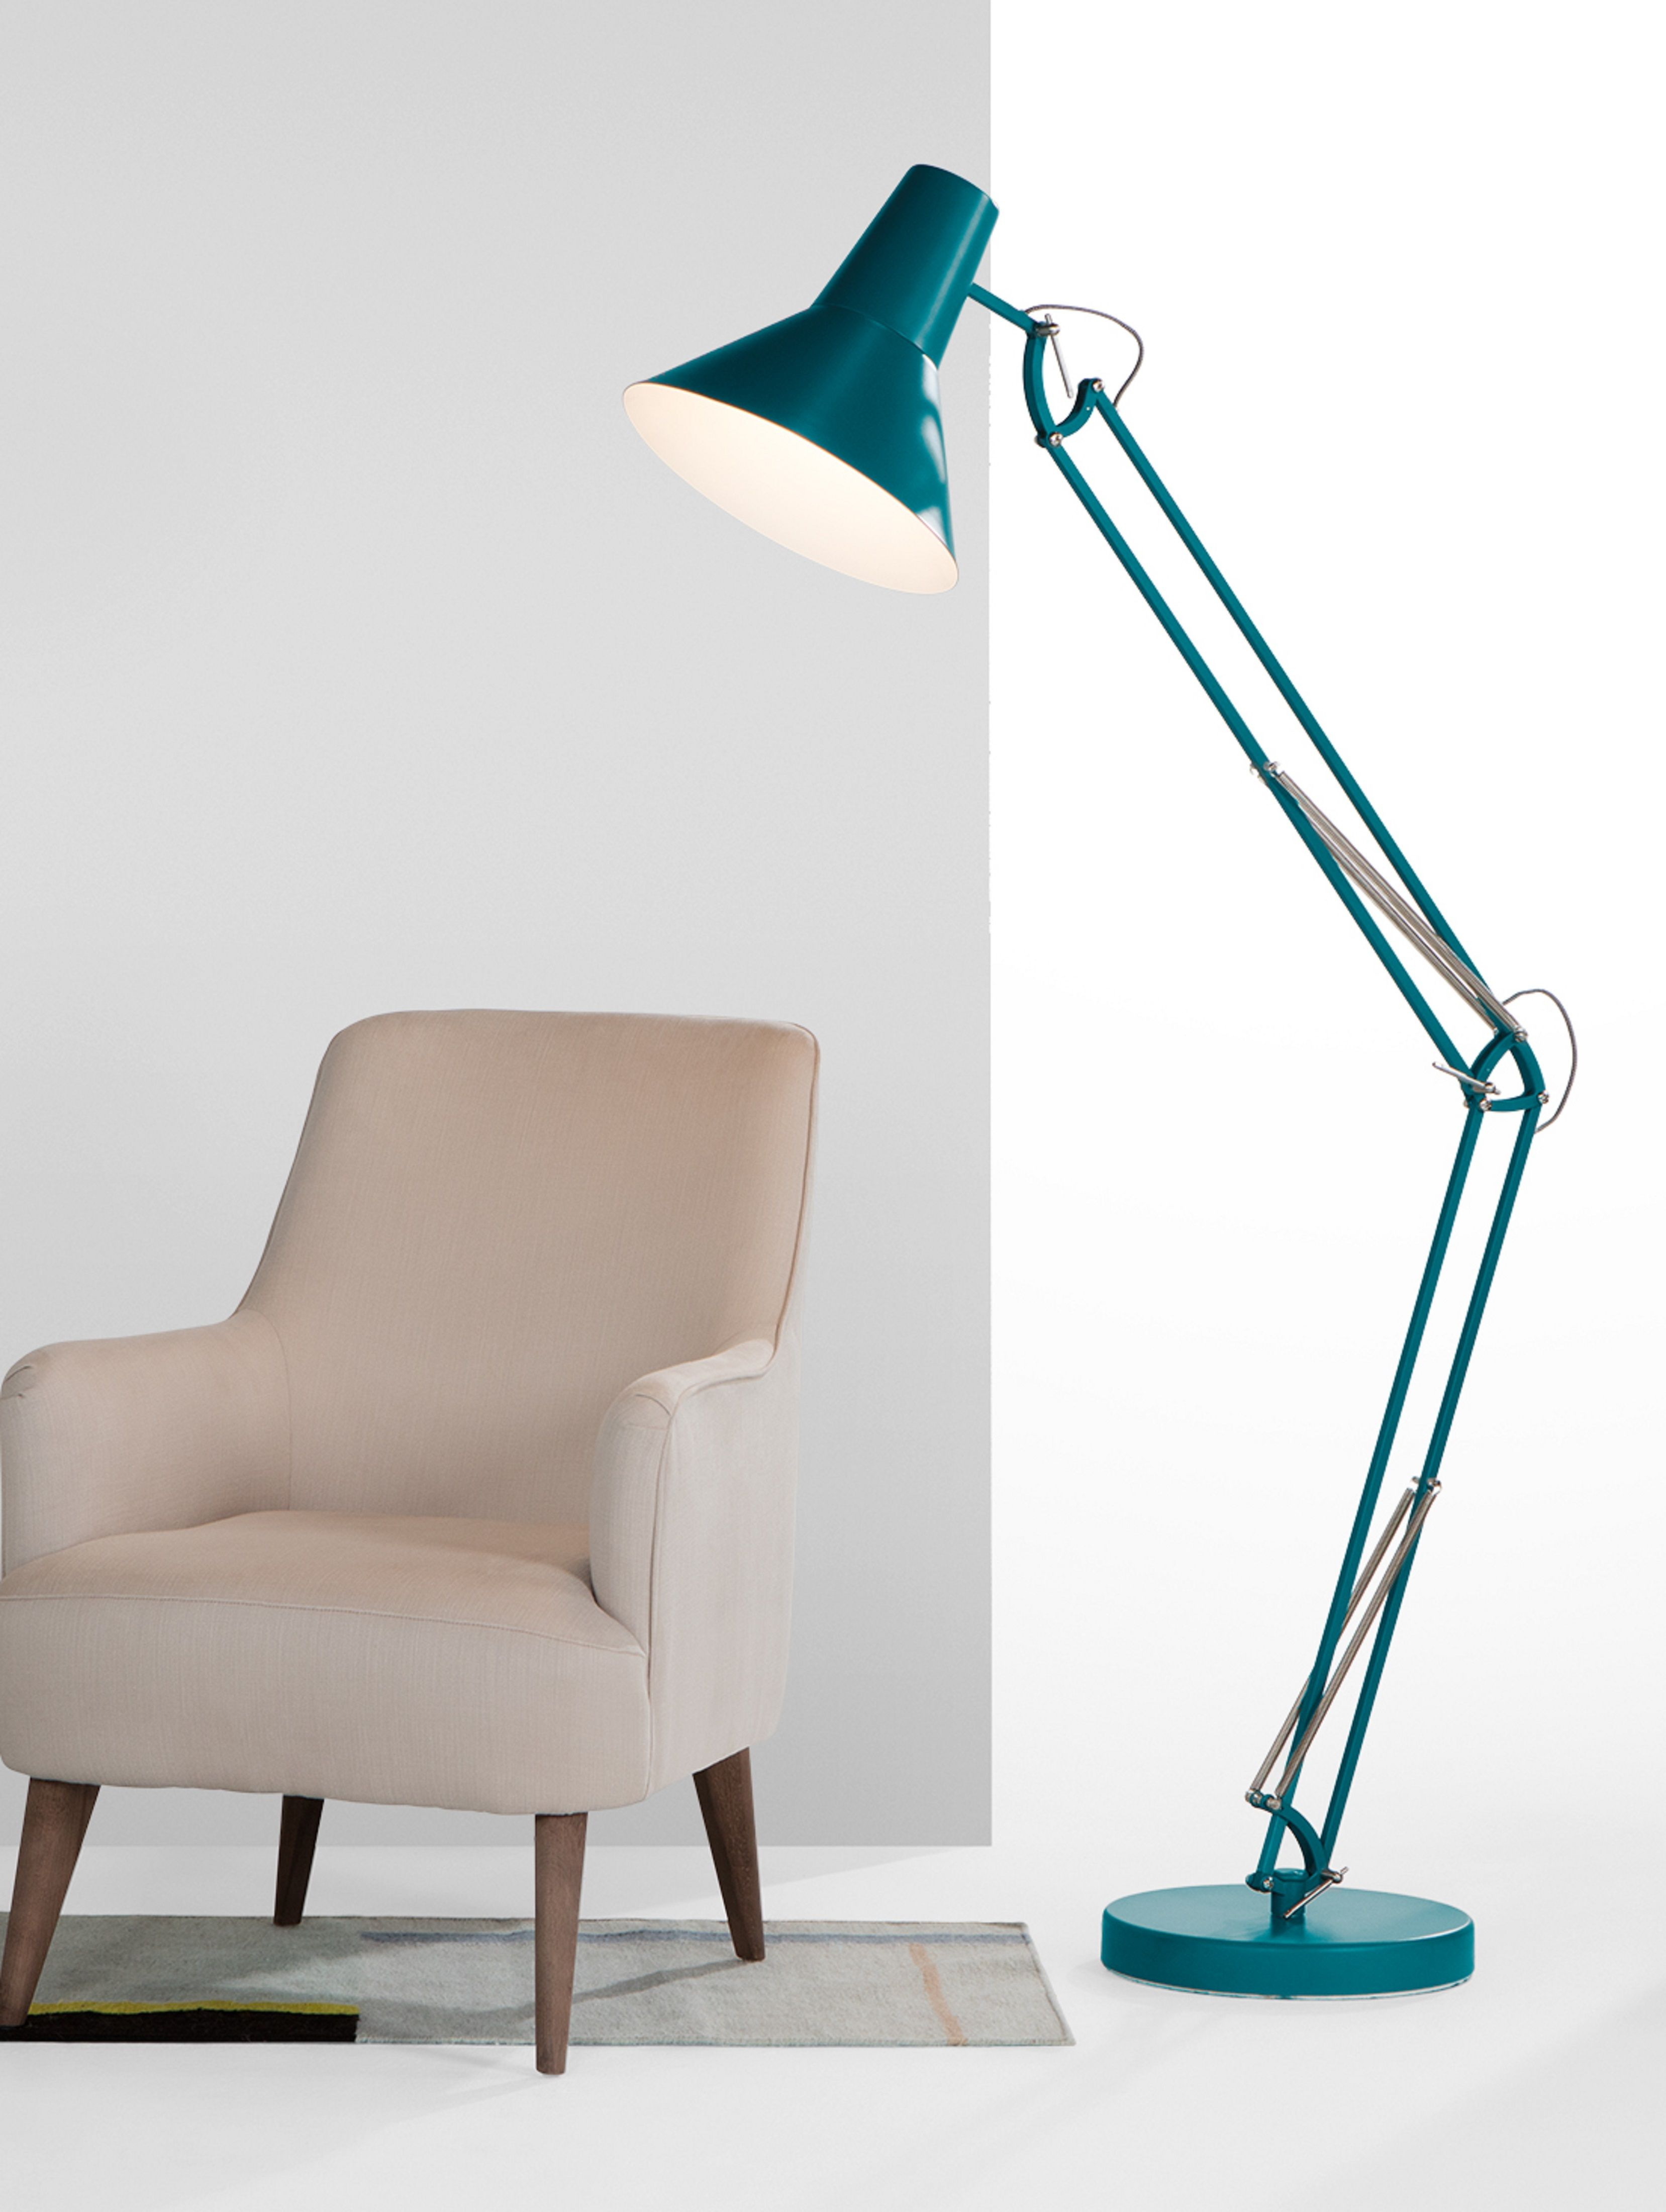 Teal Green Giant Floor Lamp Bronx Floor Lamp Modern with size 3315 X 4401